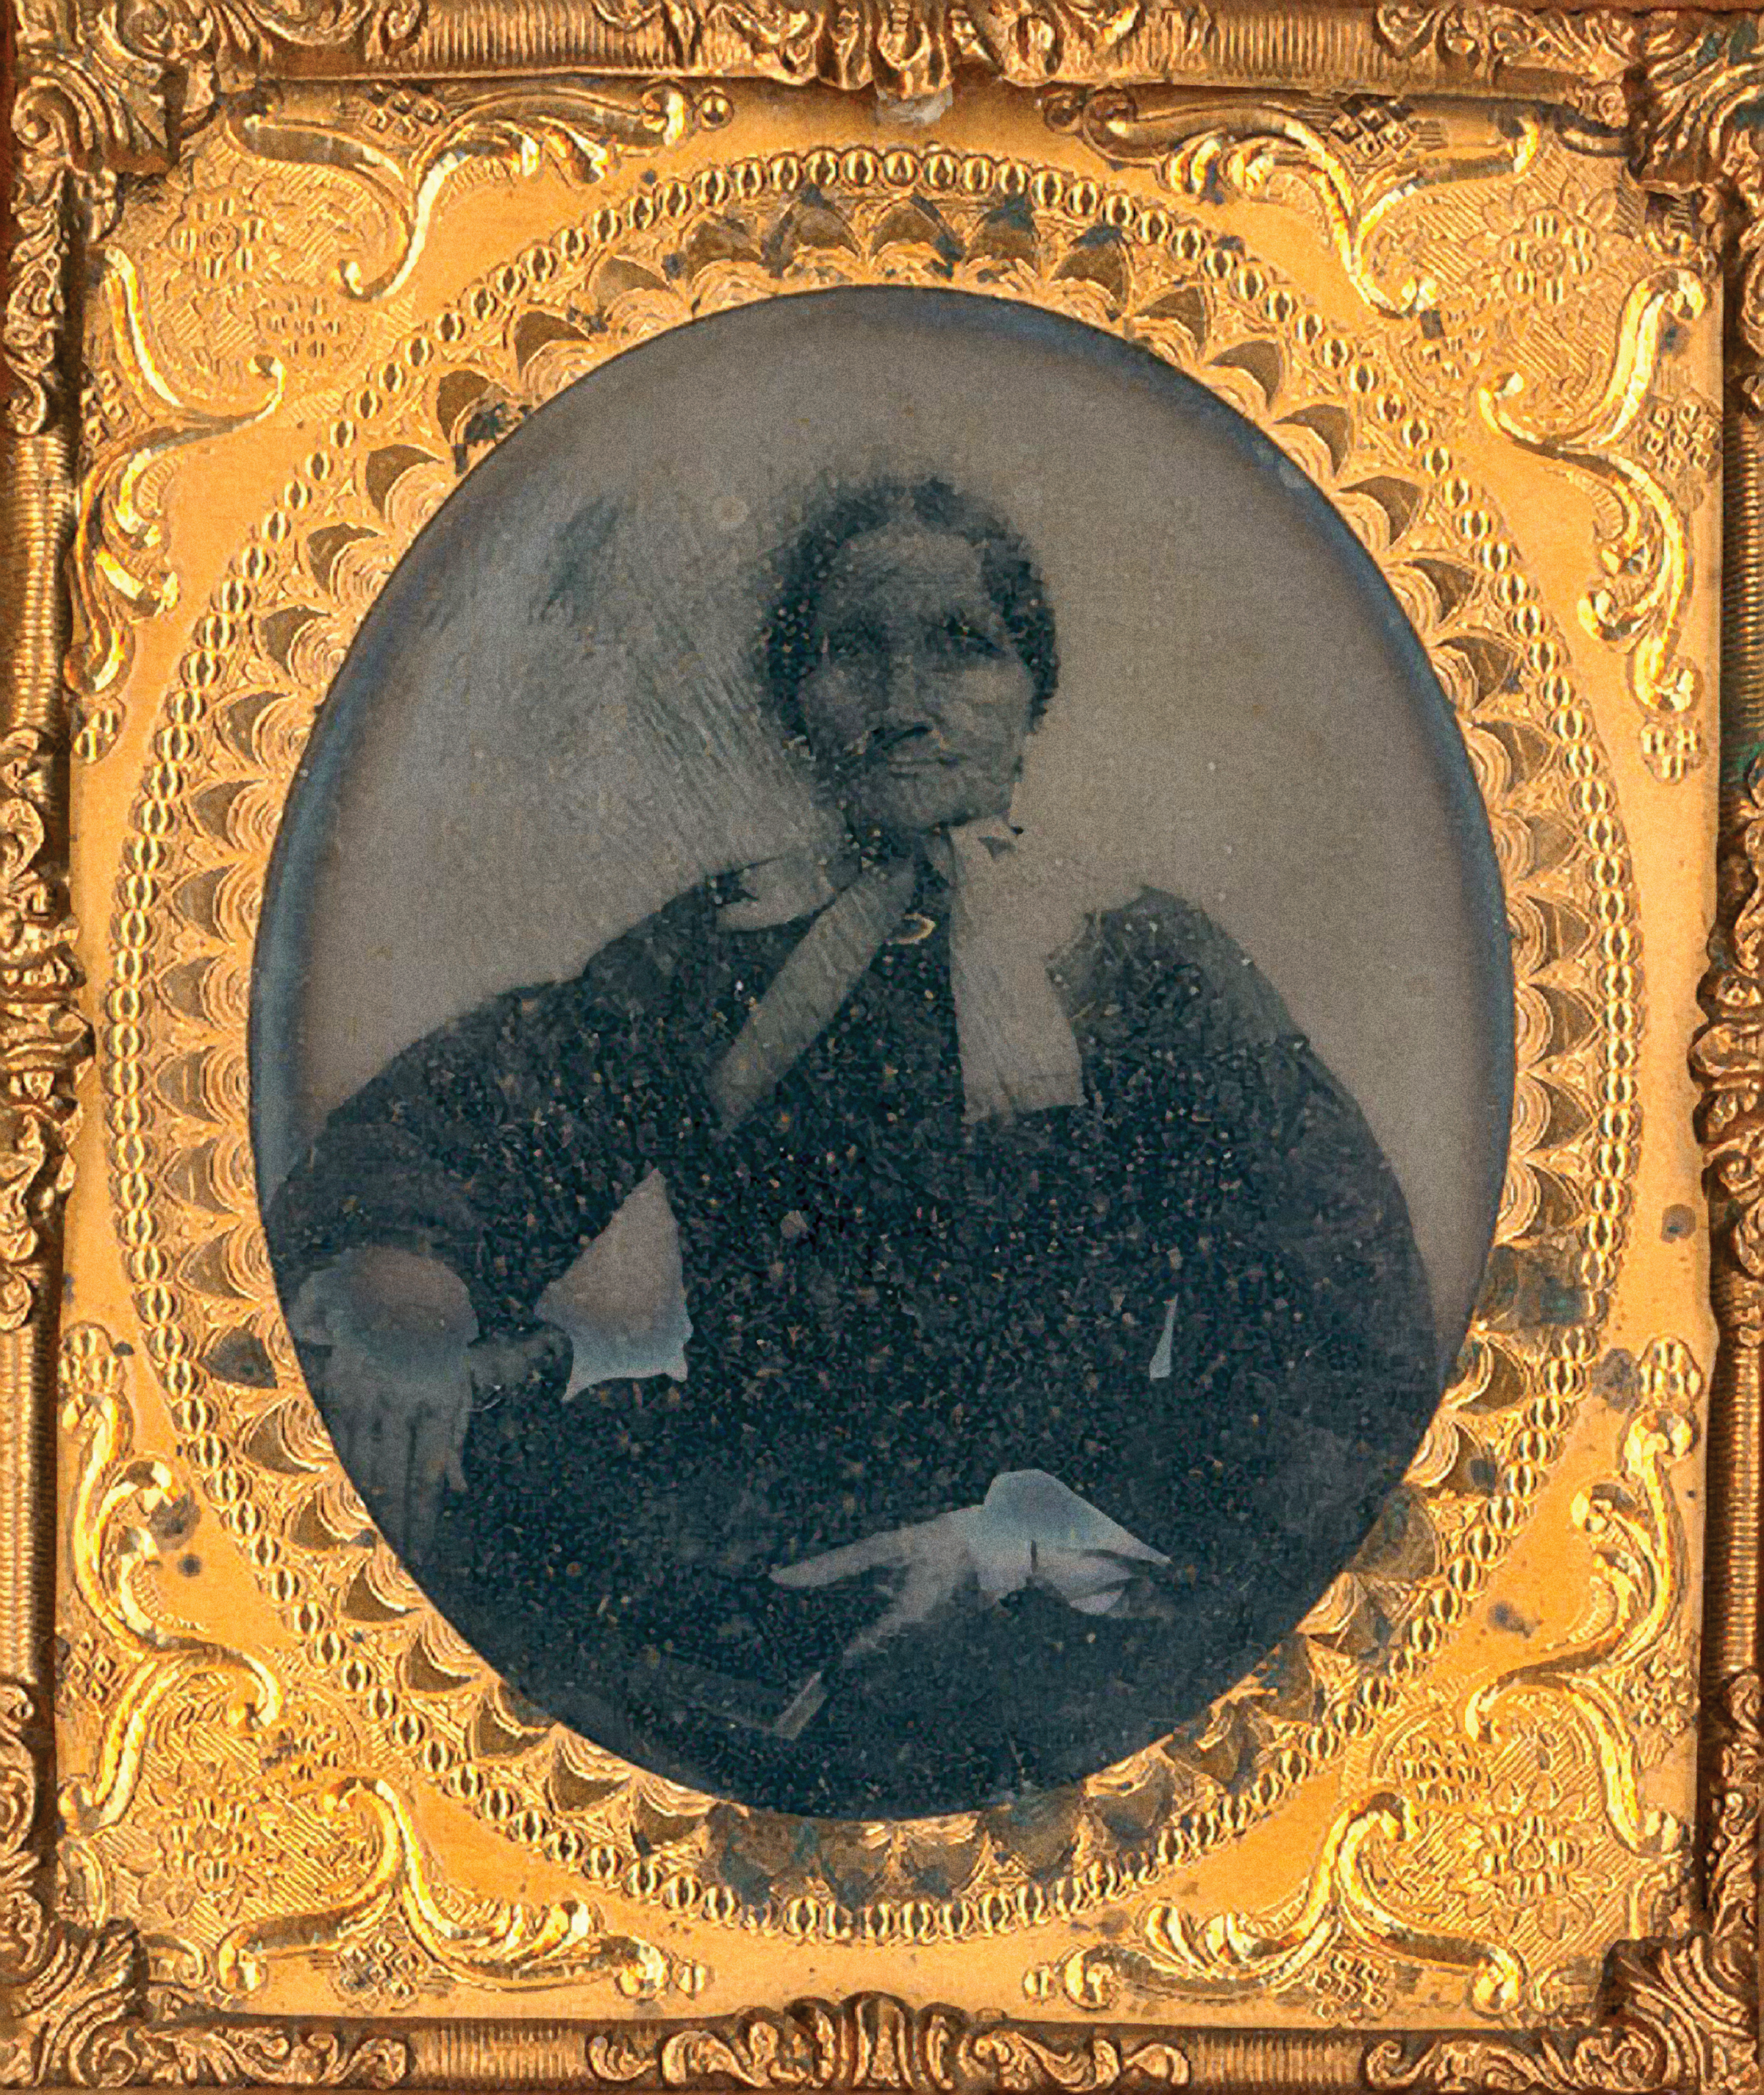 Portrait of Maria Carter Syphax, 1870. The success of the prominent Syphax family of Arlington 
began when George Washington Parke Custis, the grandson of Martha Washington, manumitted his enslaved maid, Maria Carter Syphax. The Syphax family acquired 17 acres of his Arlington plantation in 1866, where they built a house and farm. Source: Wikicommons, public domain.